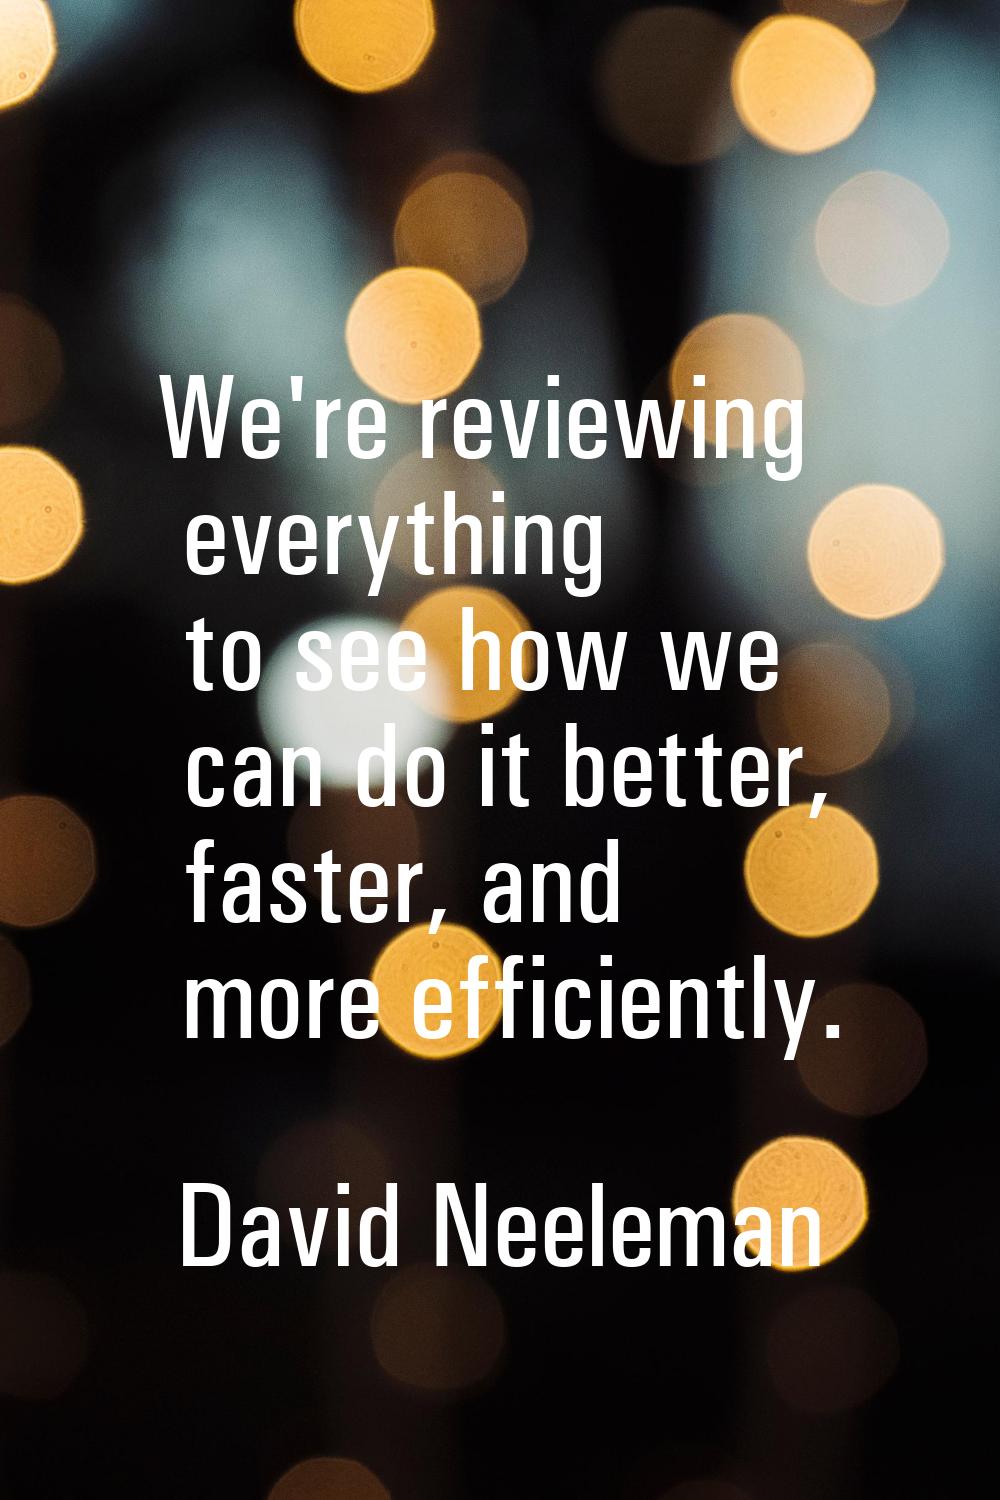 We're reviewing everything to see how we can do it better, faster, and more efficiently.